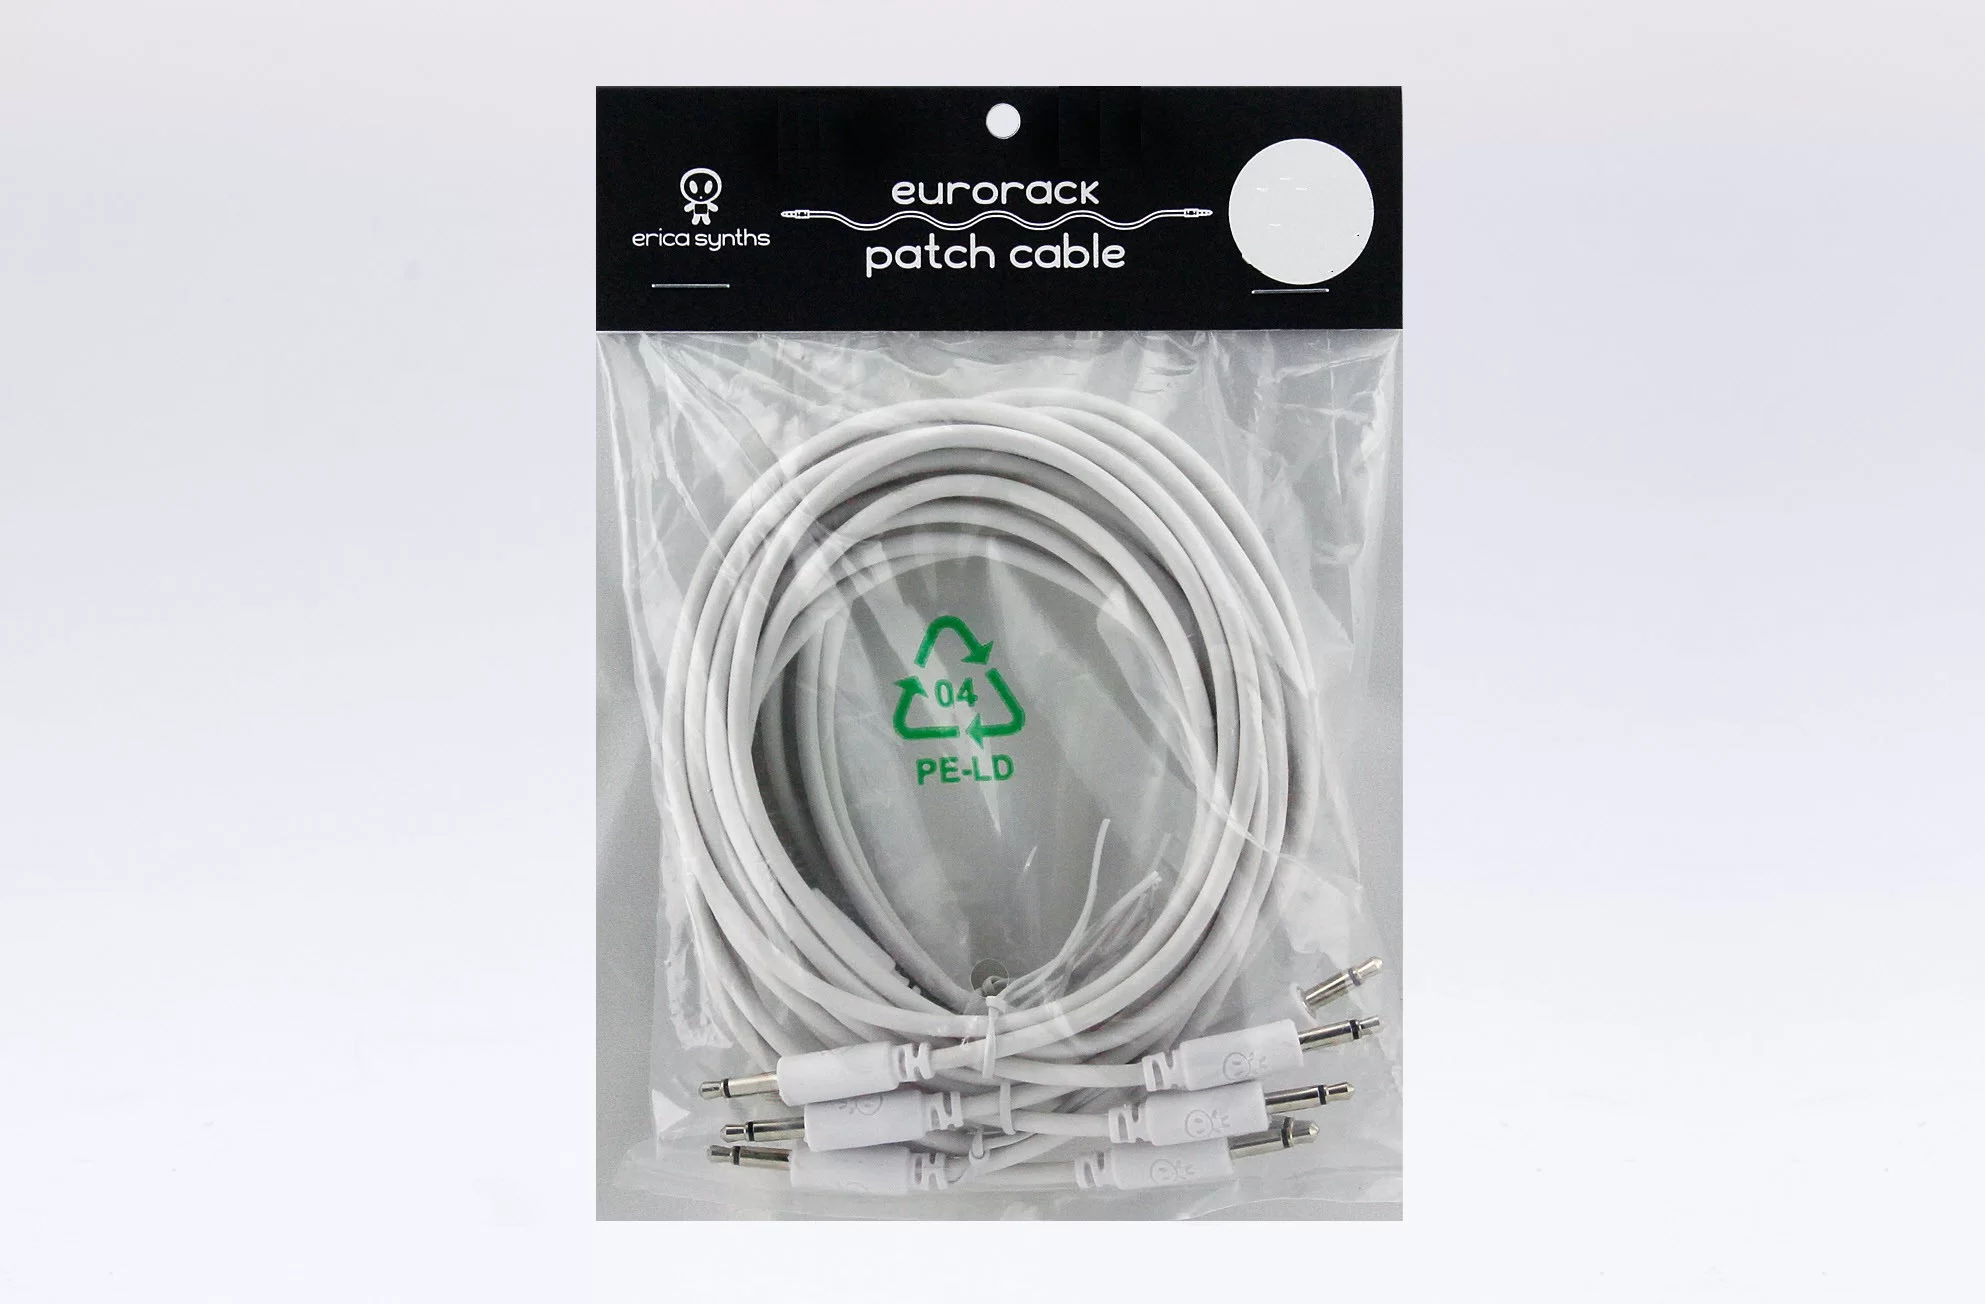 Erica Synths Eurorack patch cables 60cm (5 stk) - Rød